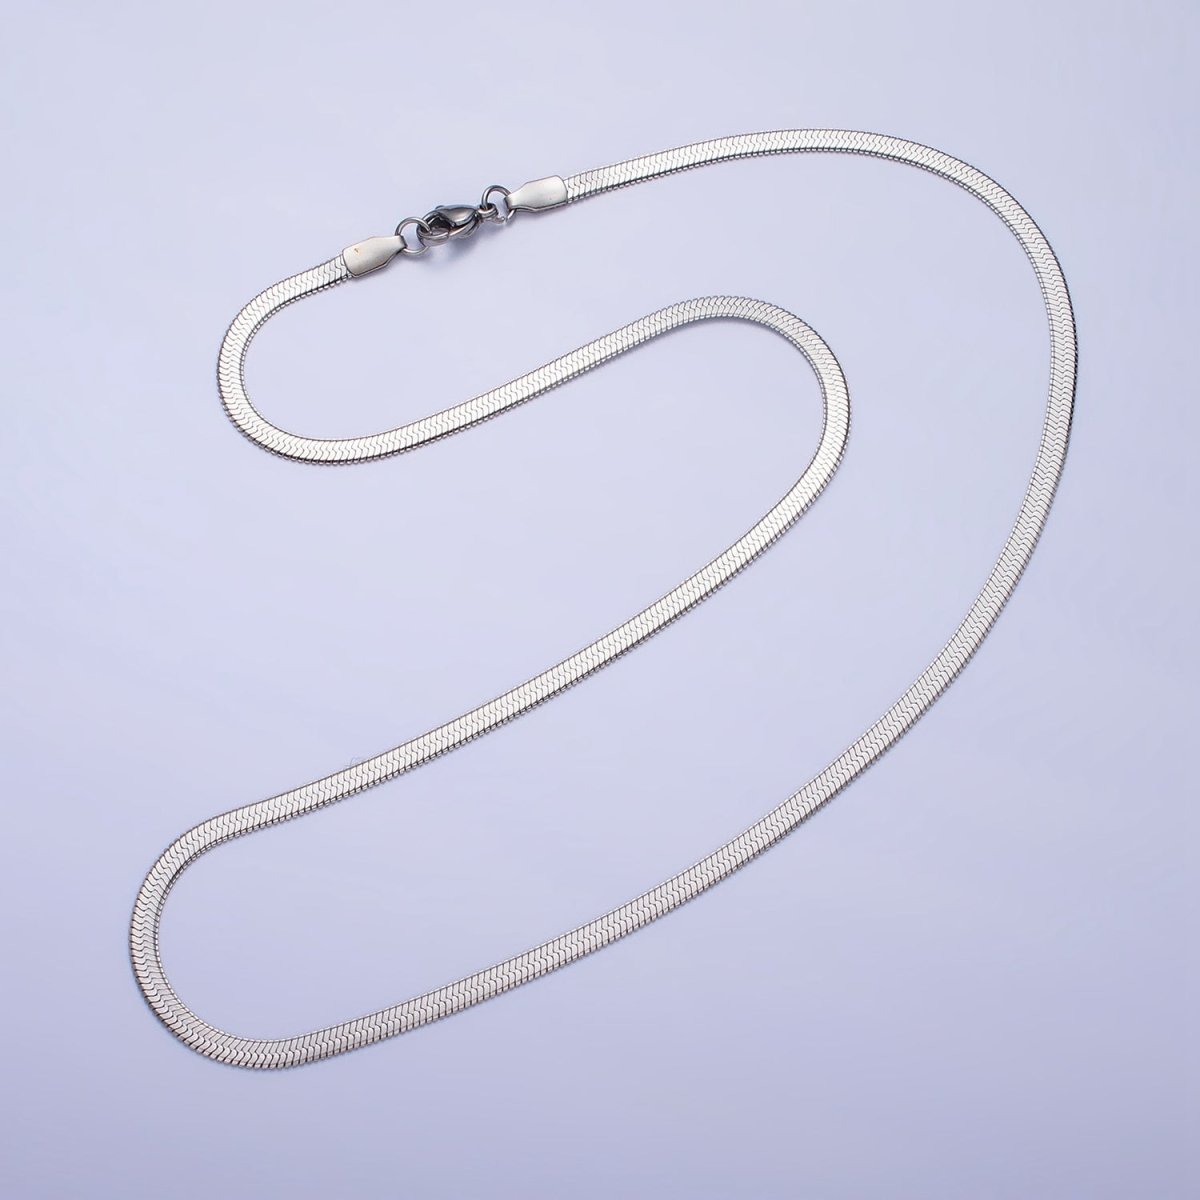 Dainty 2.5mm Gold Herringbone Chain Necklace Silver Flat Snake Chain Stainless Steel Chain 18 inch | WA-1552 WA-1553 Clearance Pricing - DLUXCA